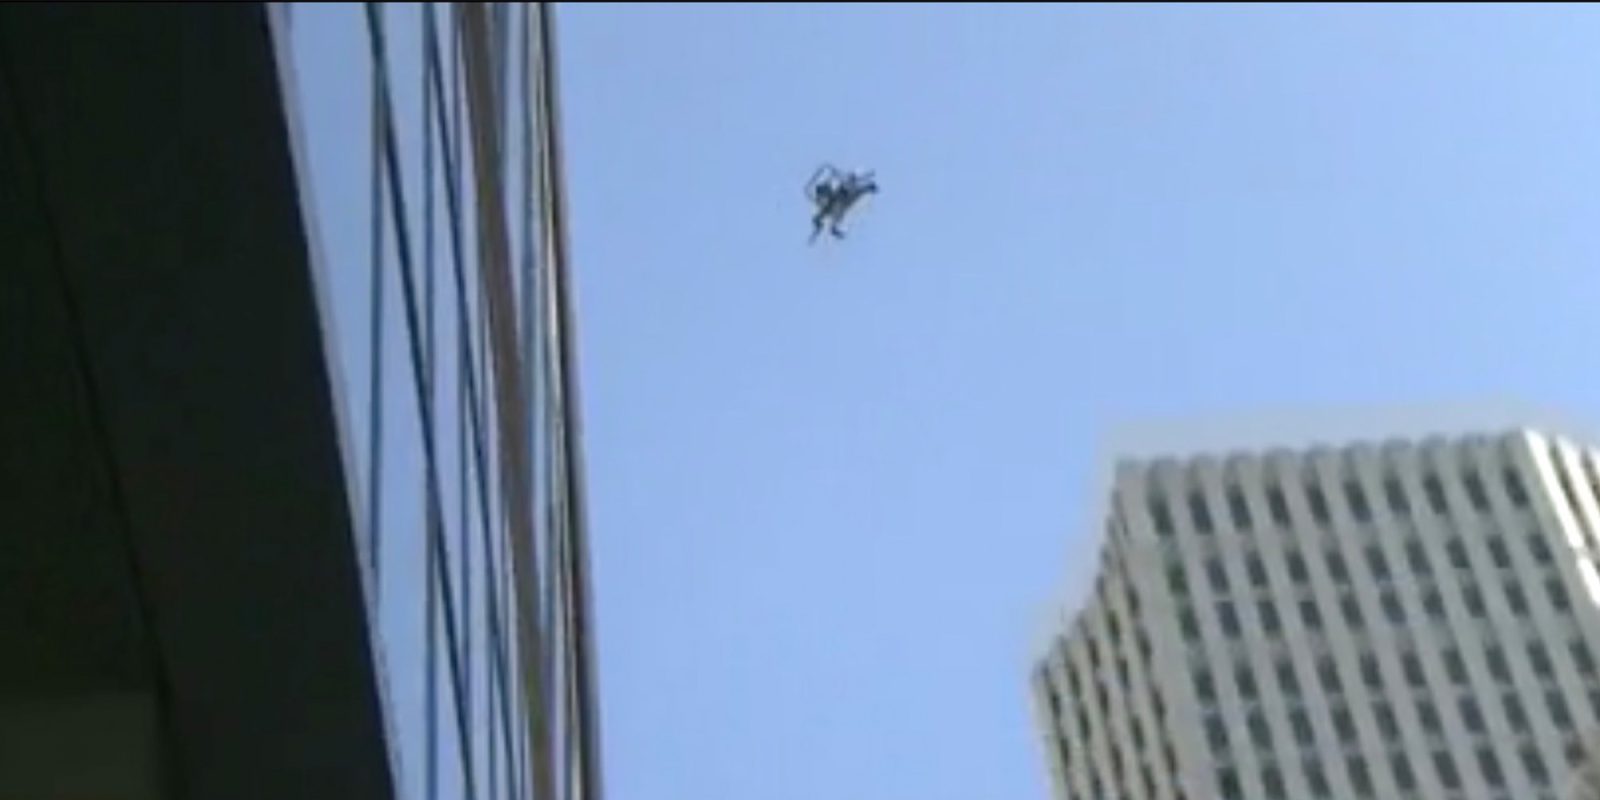 Drone falls out of the sky during inspection of sinking Millennium tower in San Francisco